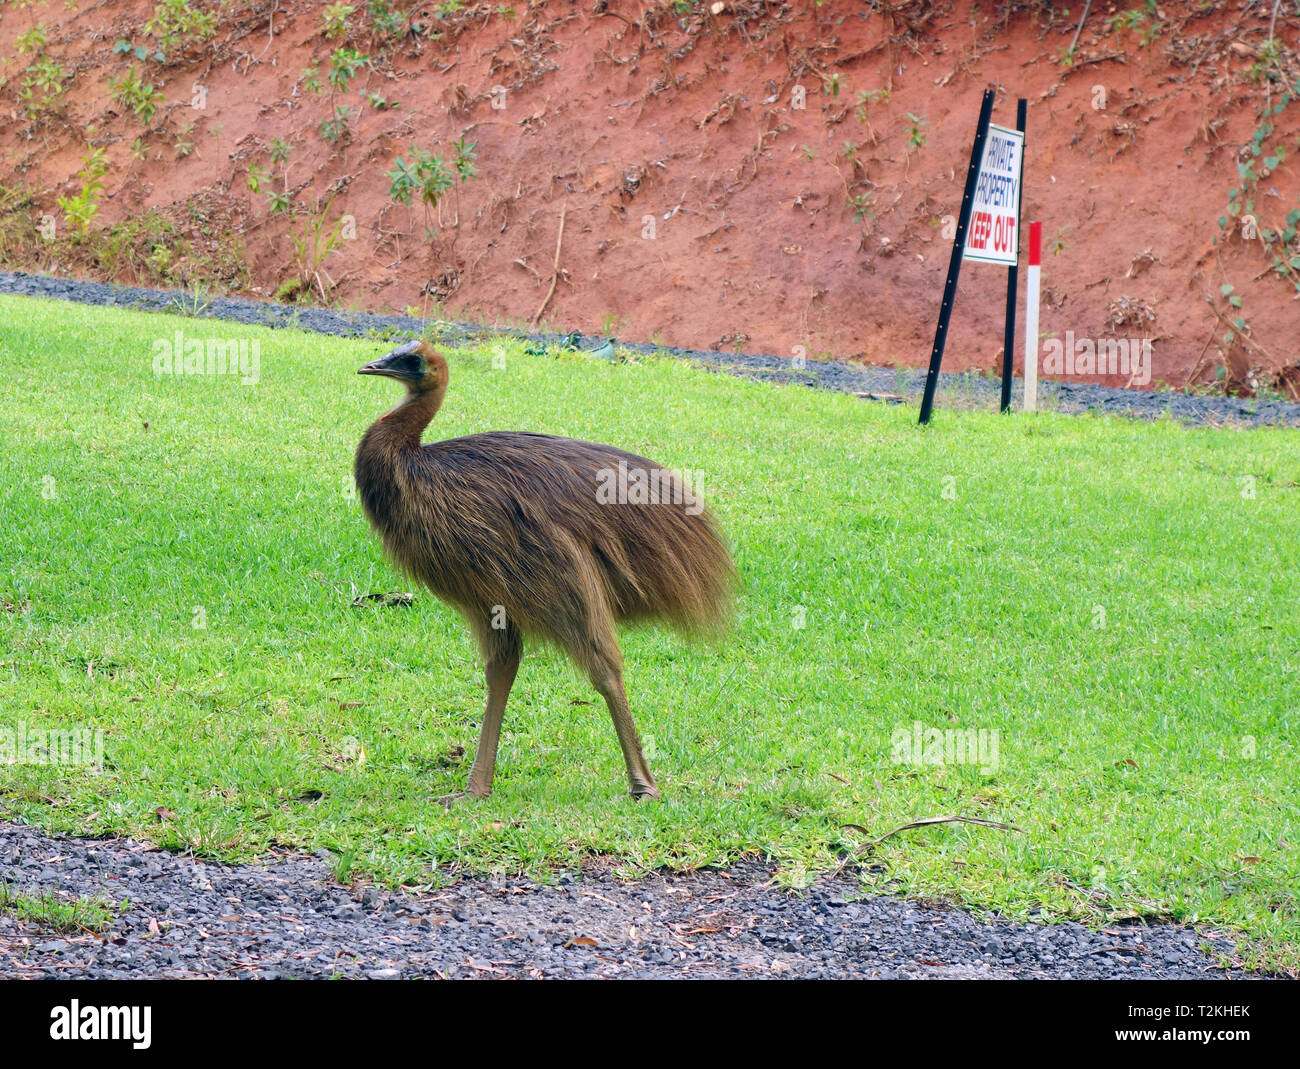 Juvenile southern cassowary (Casuarius casuarius) ignoring private property keep out sign, Etty Bay, near Innisfail, Queensland, Australia Stock Photo